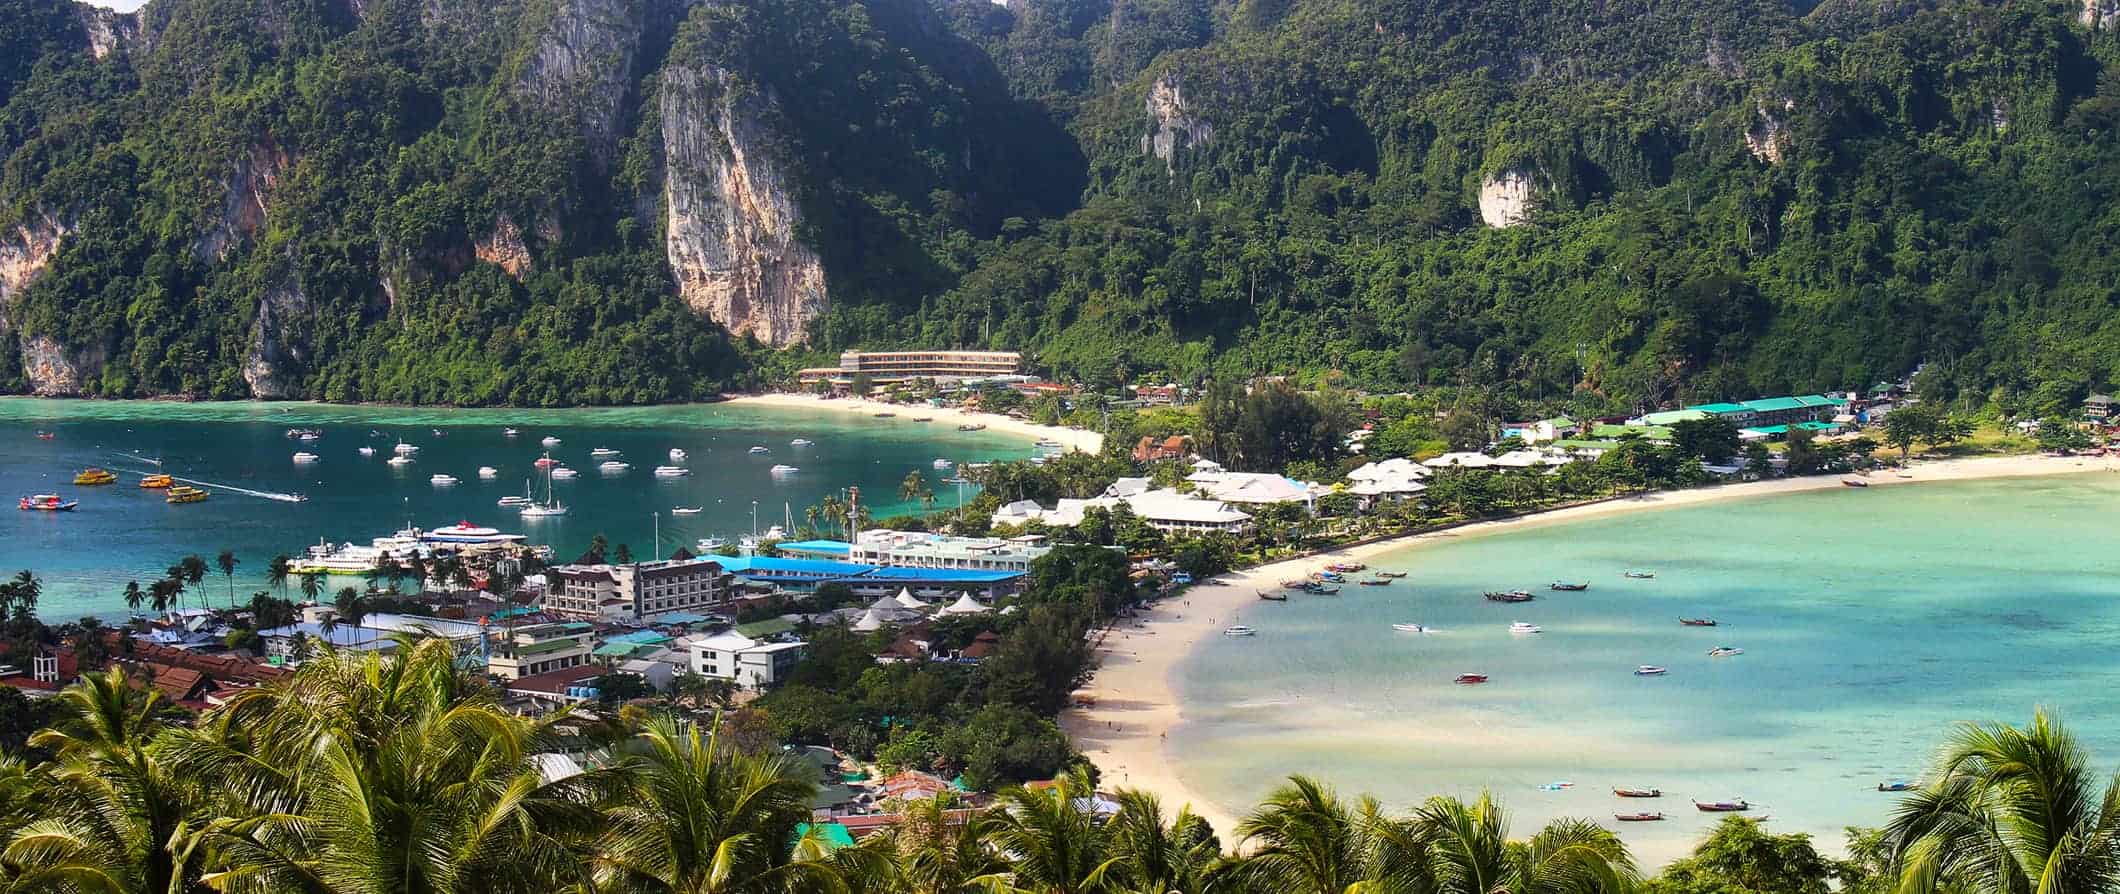 A view of Ko Phi Phi, Thailand and its lush jungles and beaches as seen from a scenic lookover